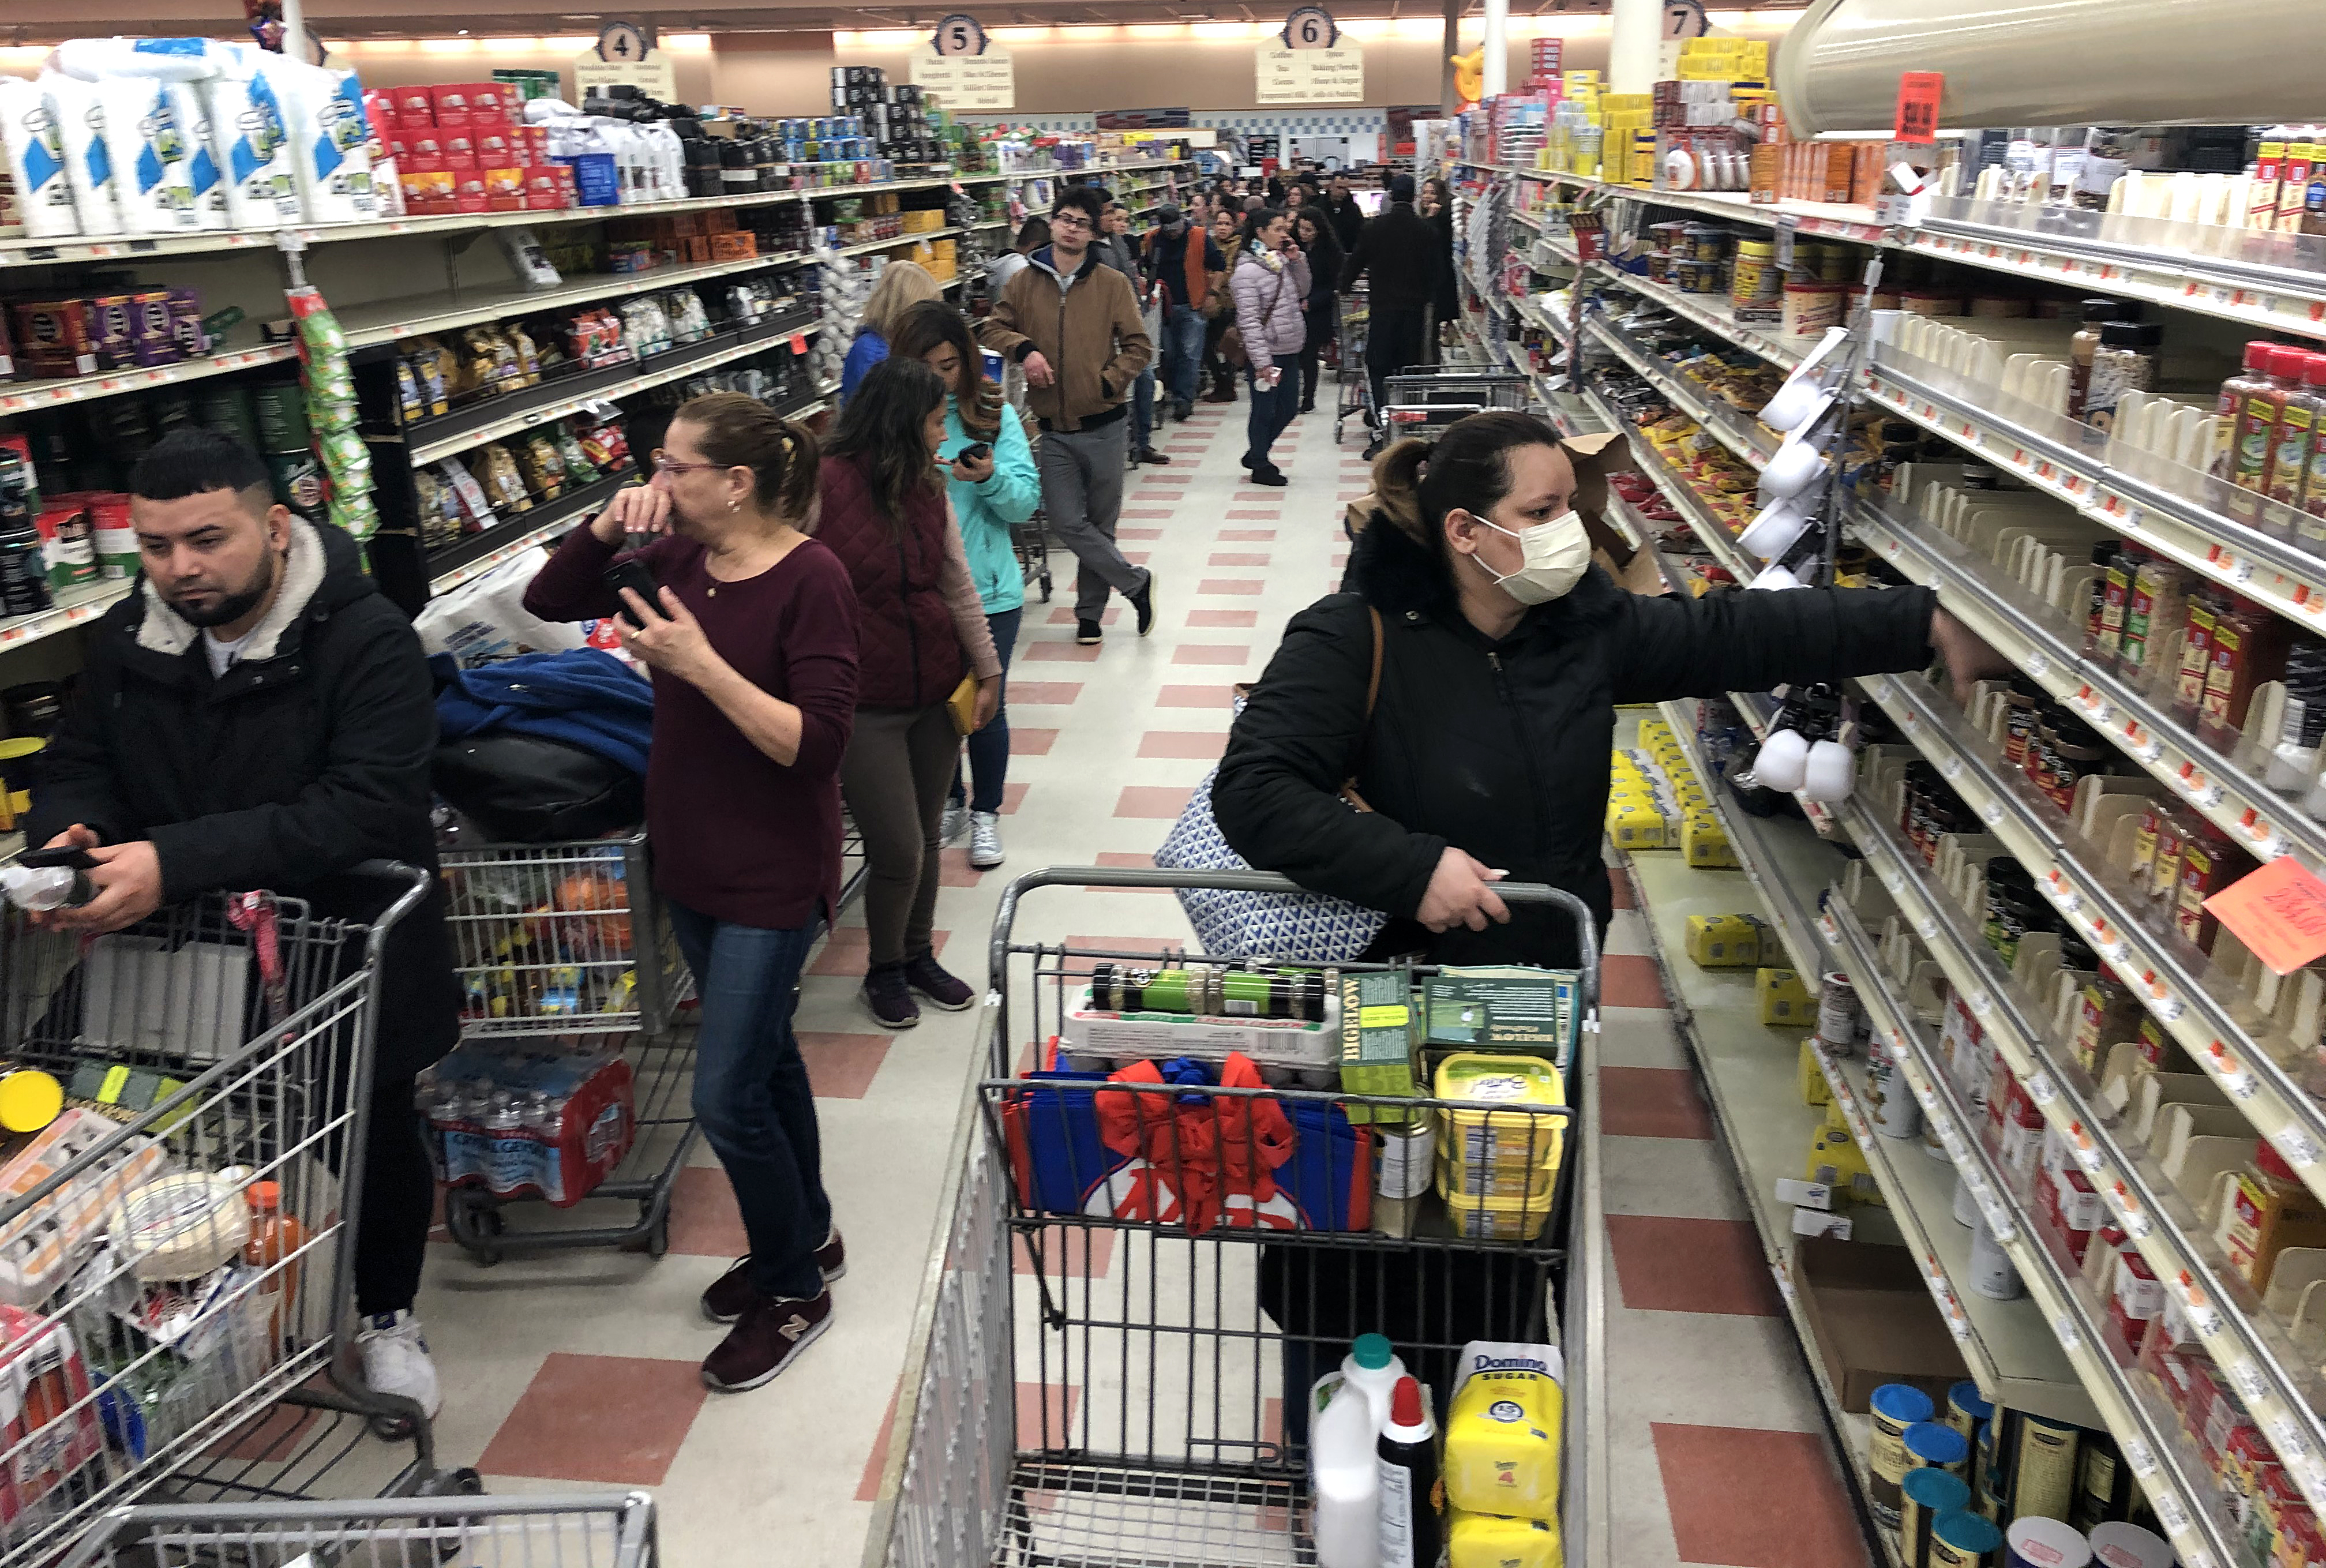 A woman in a protective mask shops as a line of shoppers stretch to the back of the store waiting to check-out at the Market Basket in Chelsea, Mass. on March 13, 2020. (Bill Greene—Boston Globe/Getty Images)